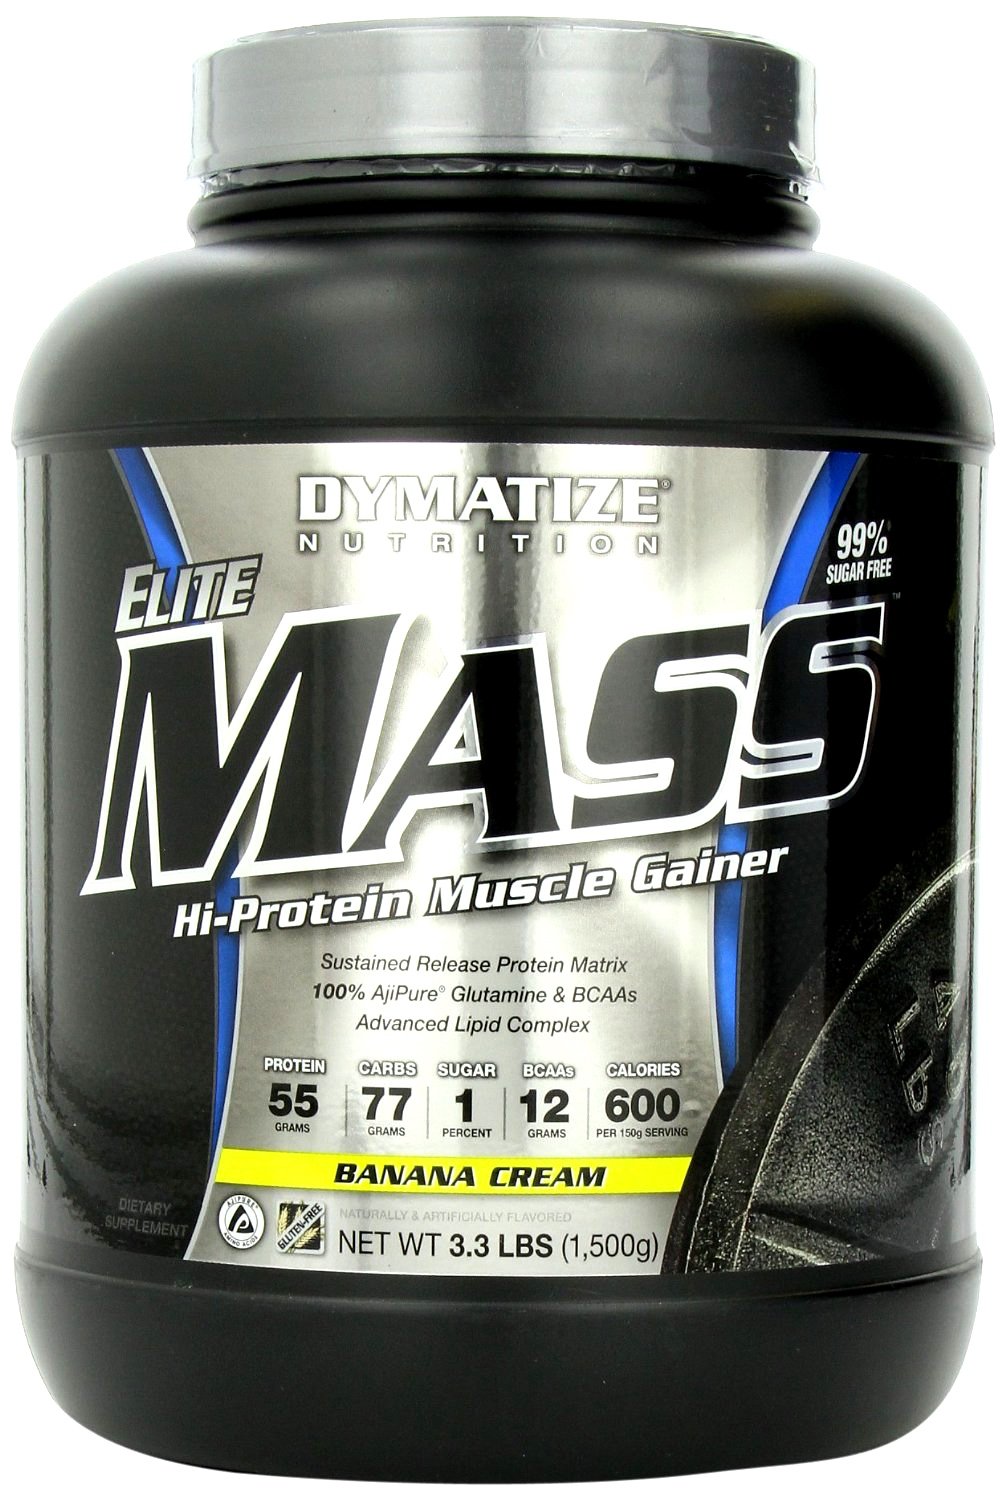 Elite Mass Gainer, 1500 g, Dymatize Nutrition. Gainer. Mass Gain Energy & Endurance recovery 